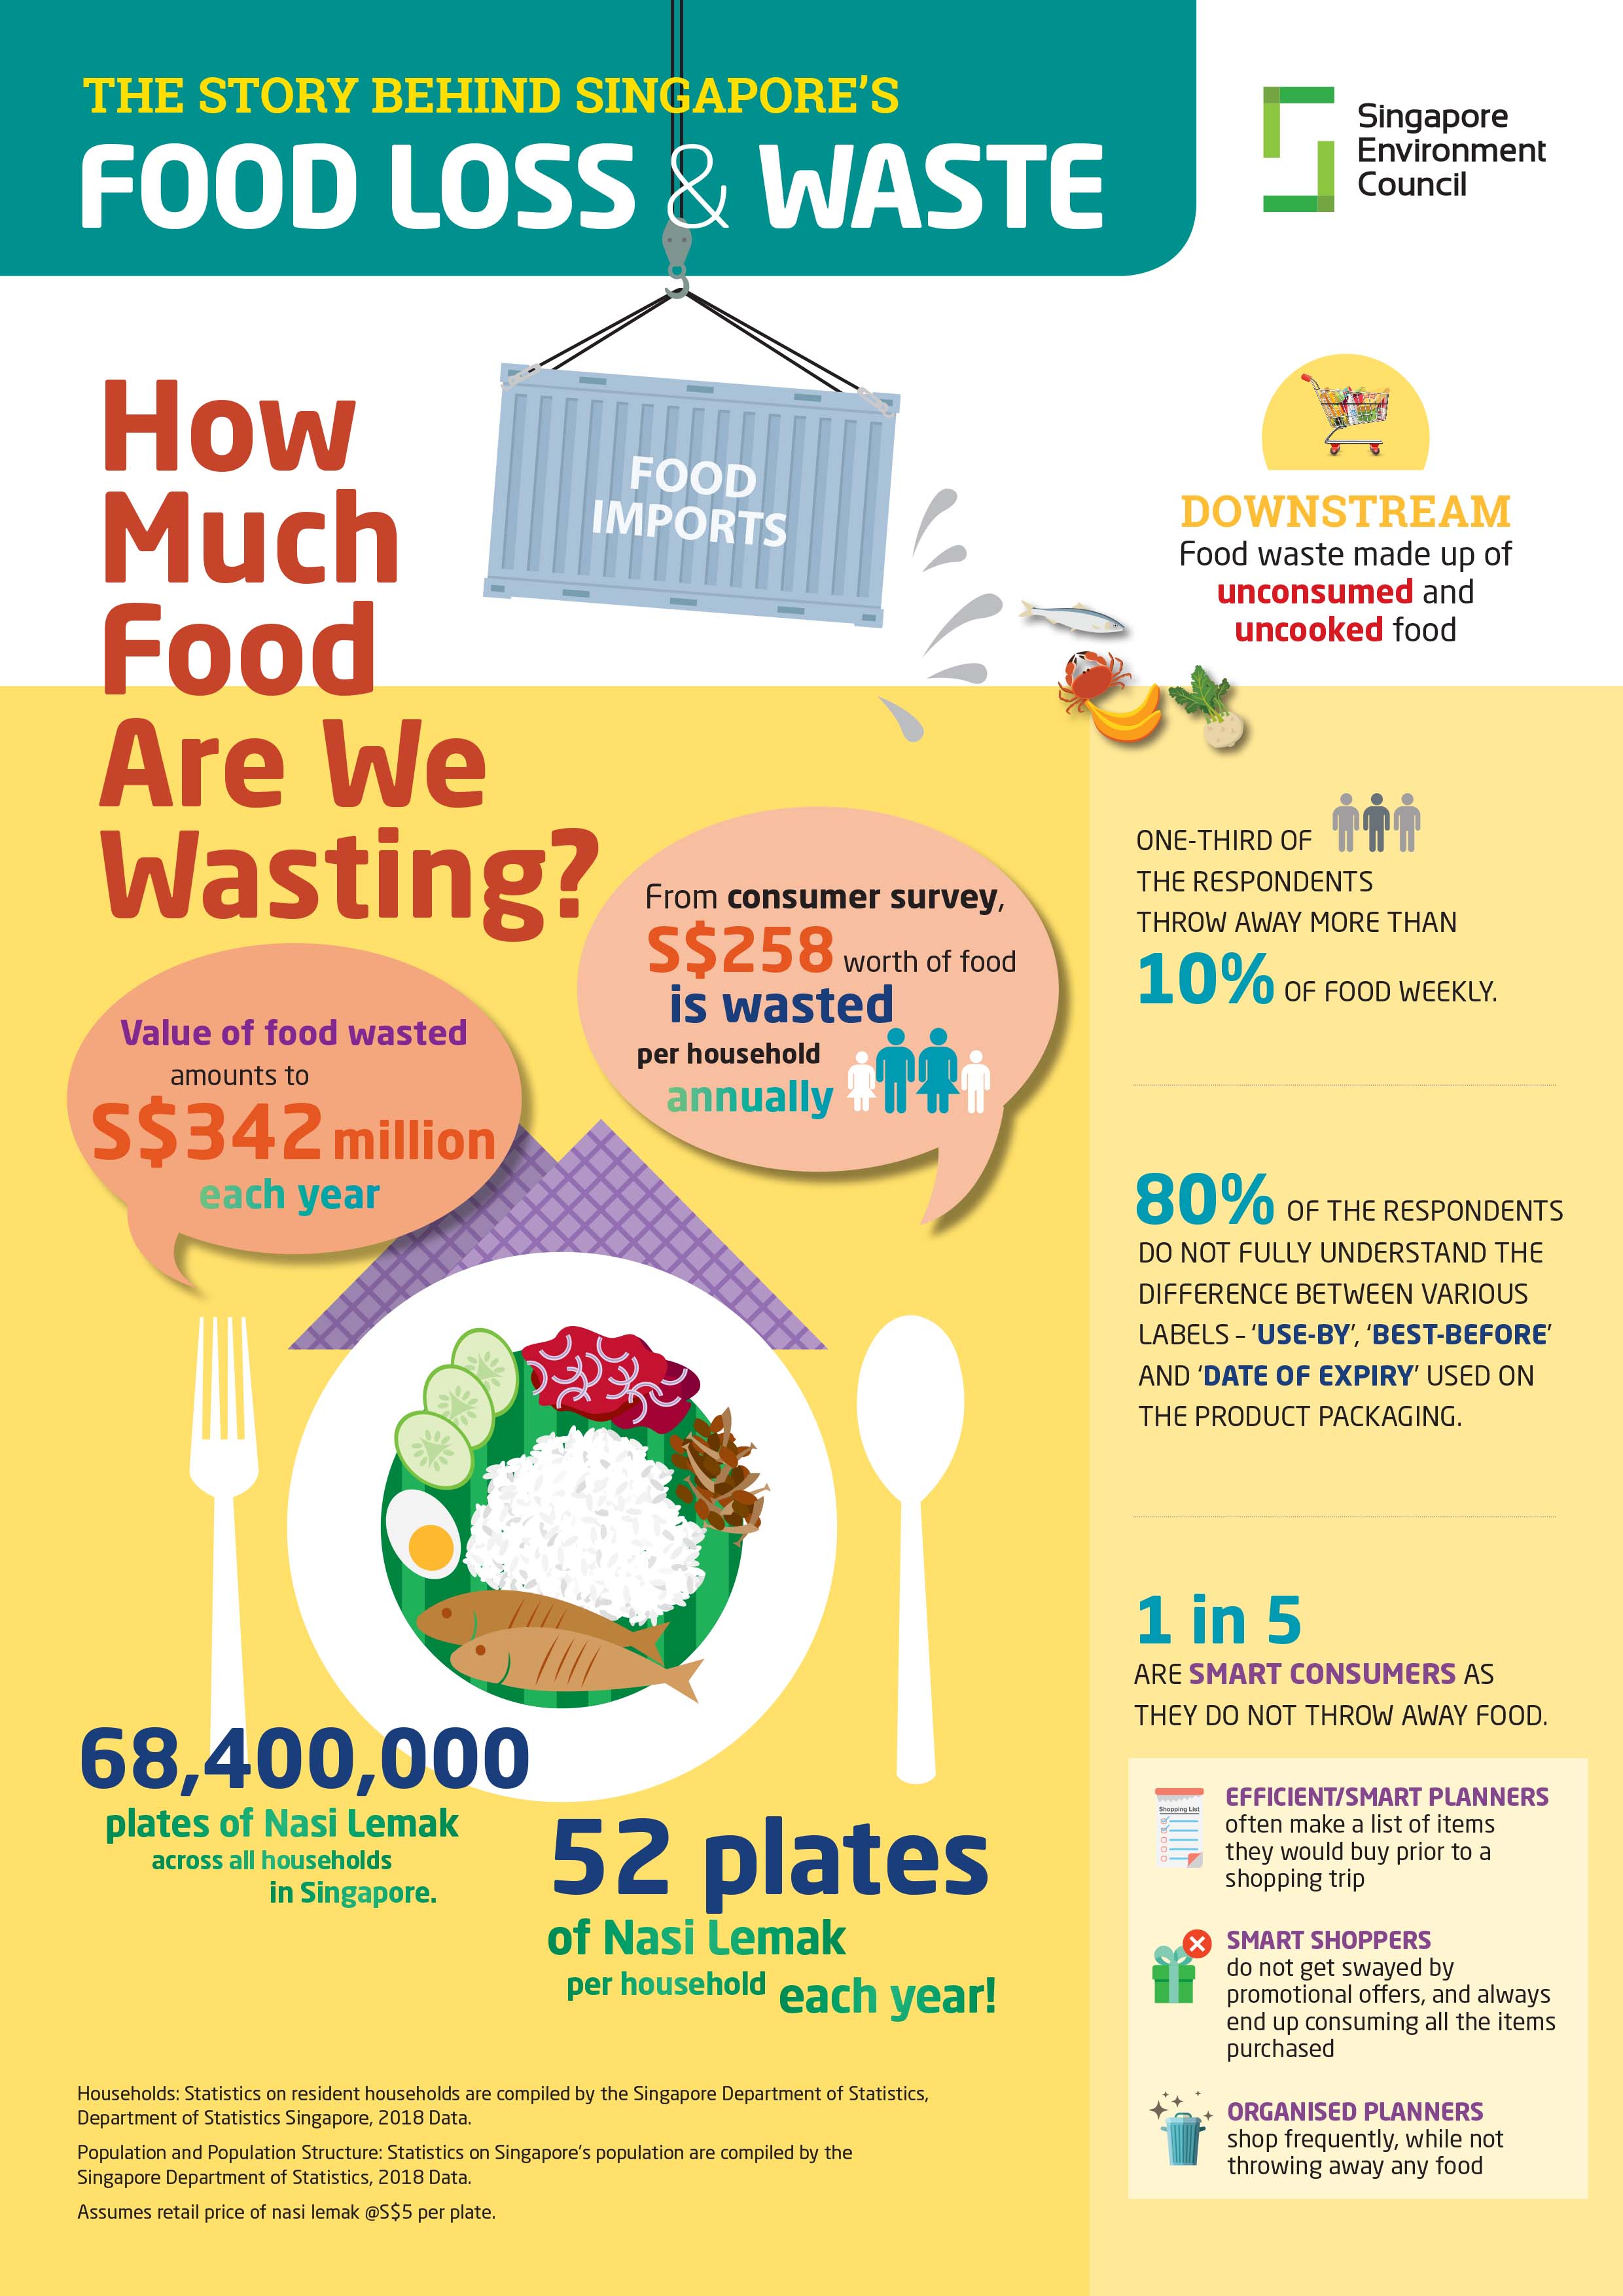 study_on_food_loss_and_food_waste_in_singapore_infographic_6_aug_2019-2.jpg